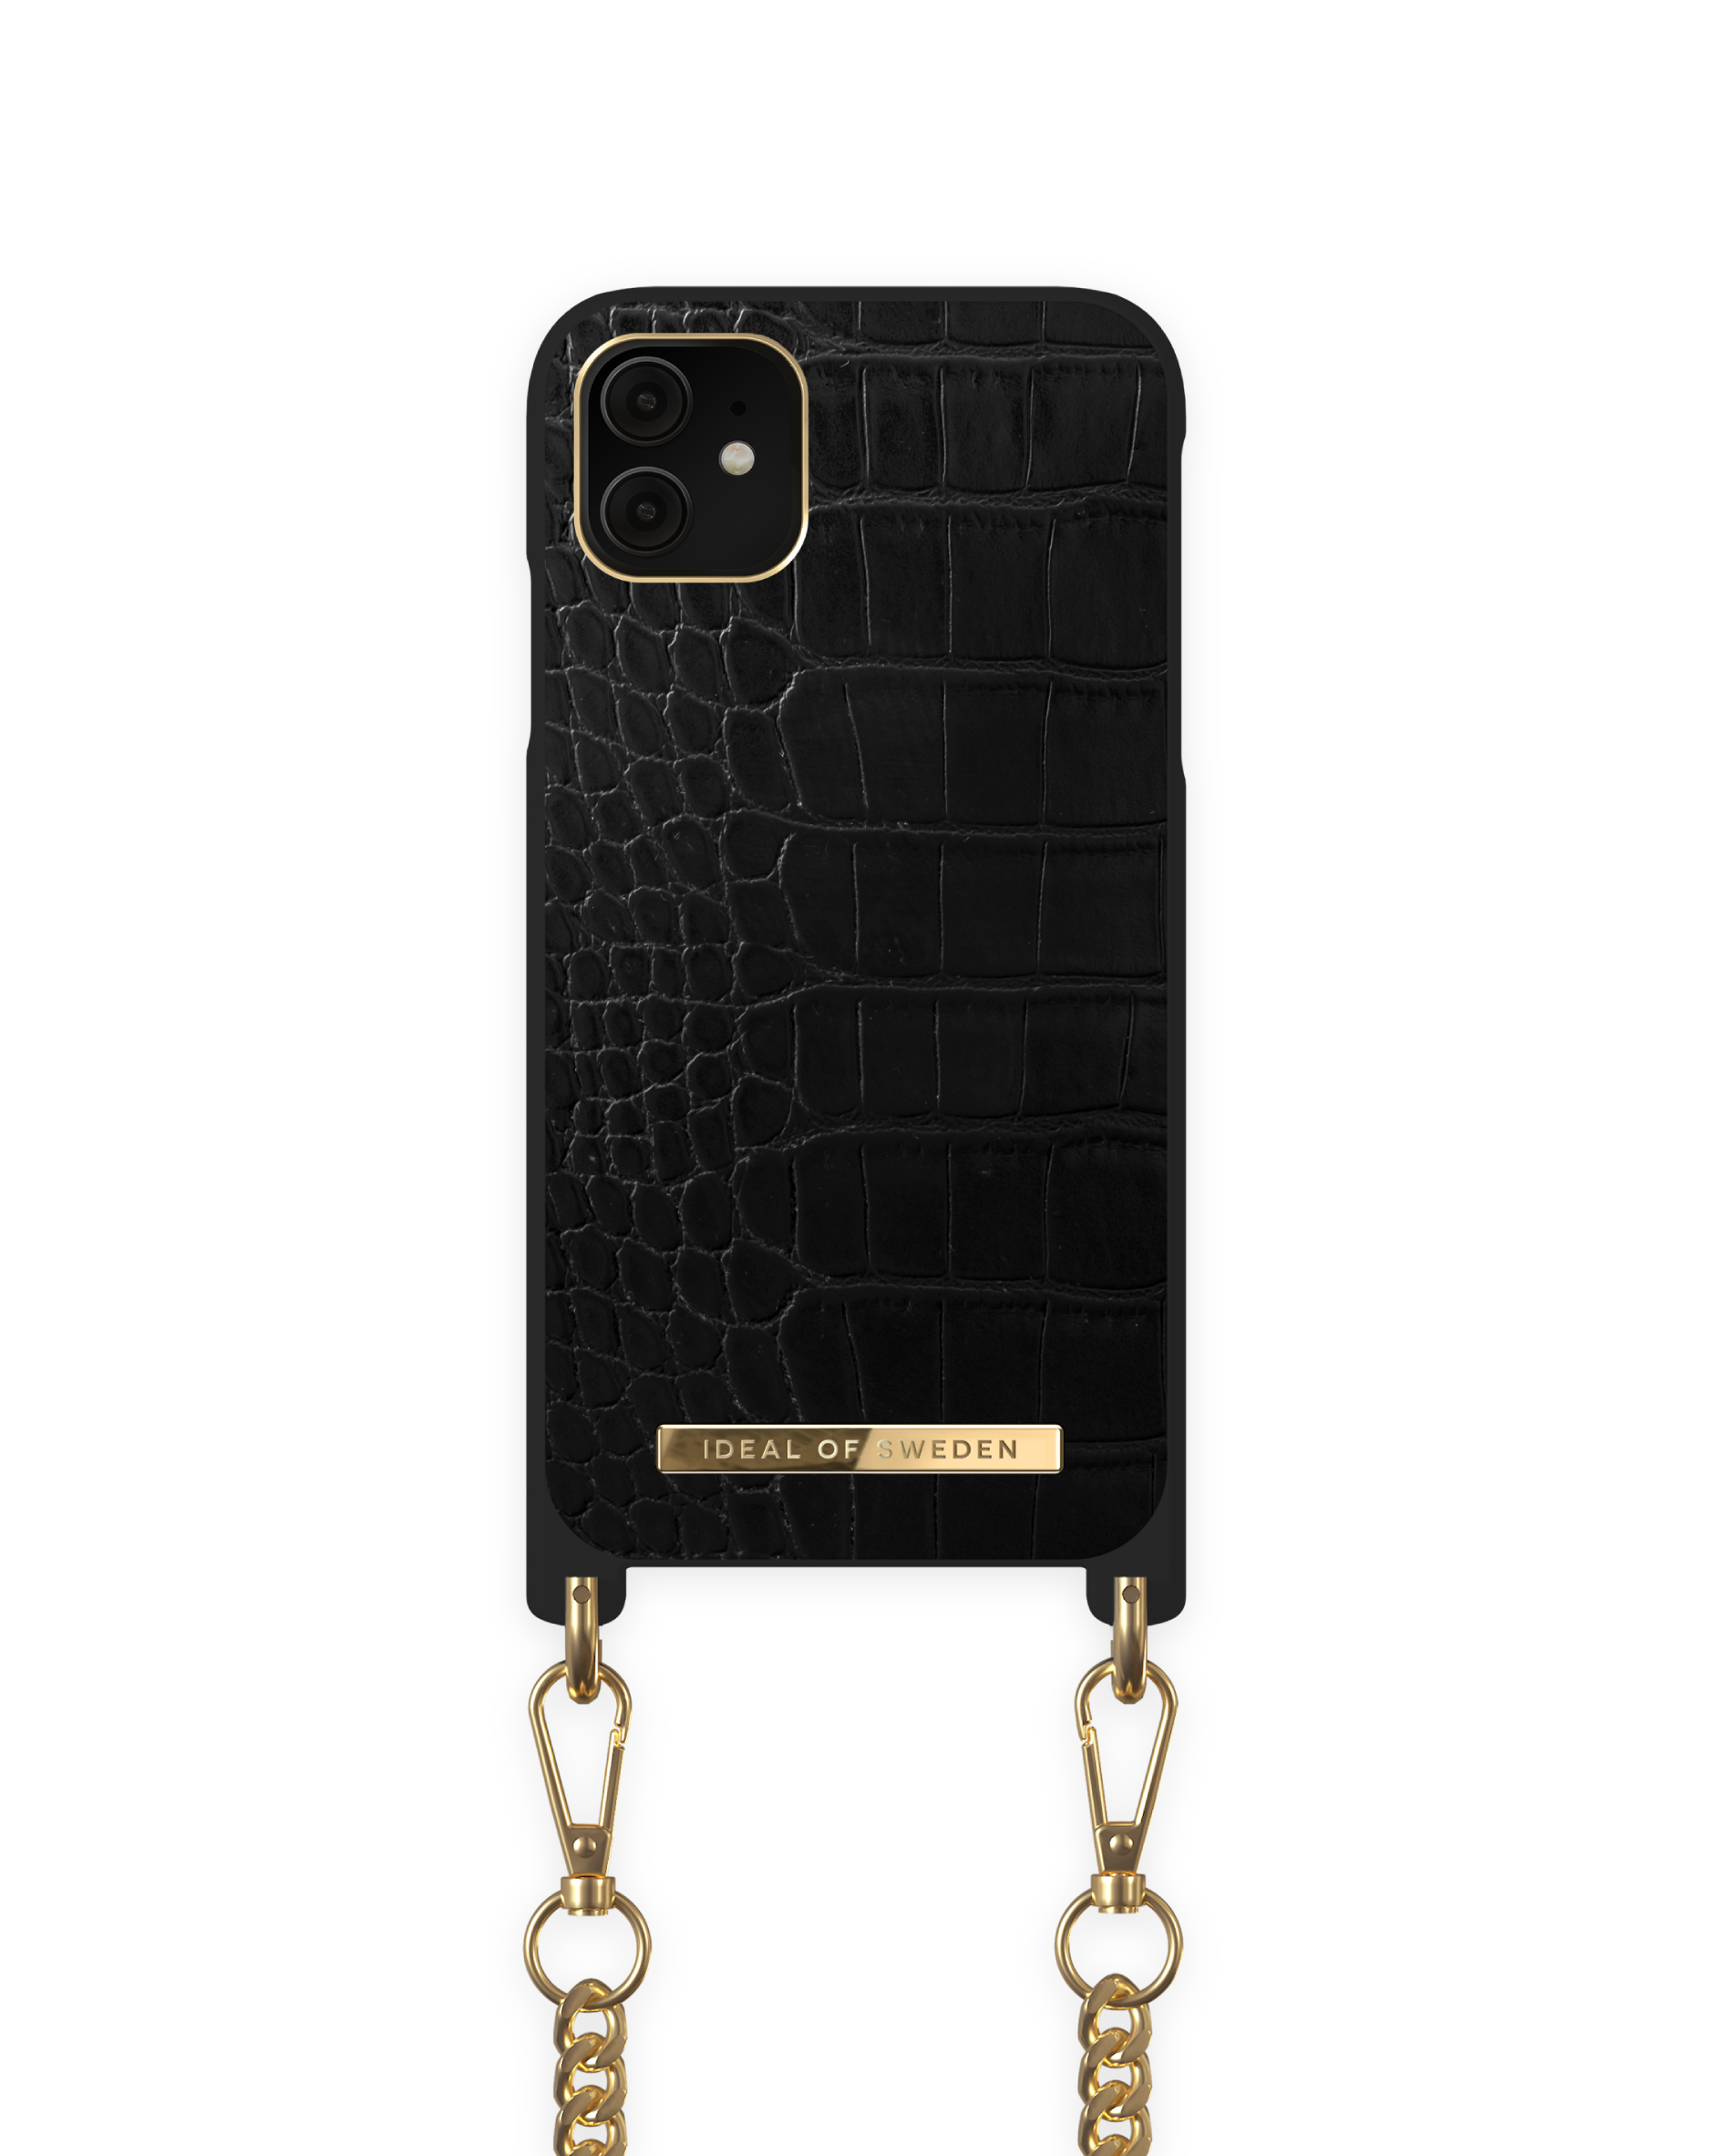 Black Apple, SWEDEN XR, 11, iPhone Croco iPhone OF Backcover, IDNCSS20-I1961-207, Jet IDEAL